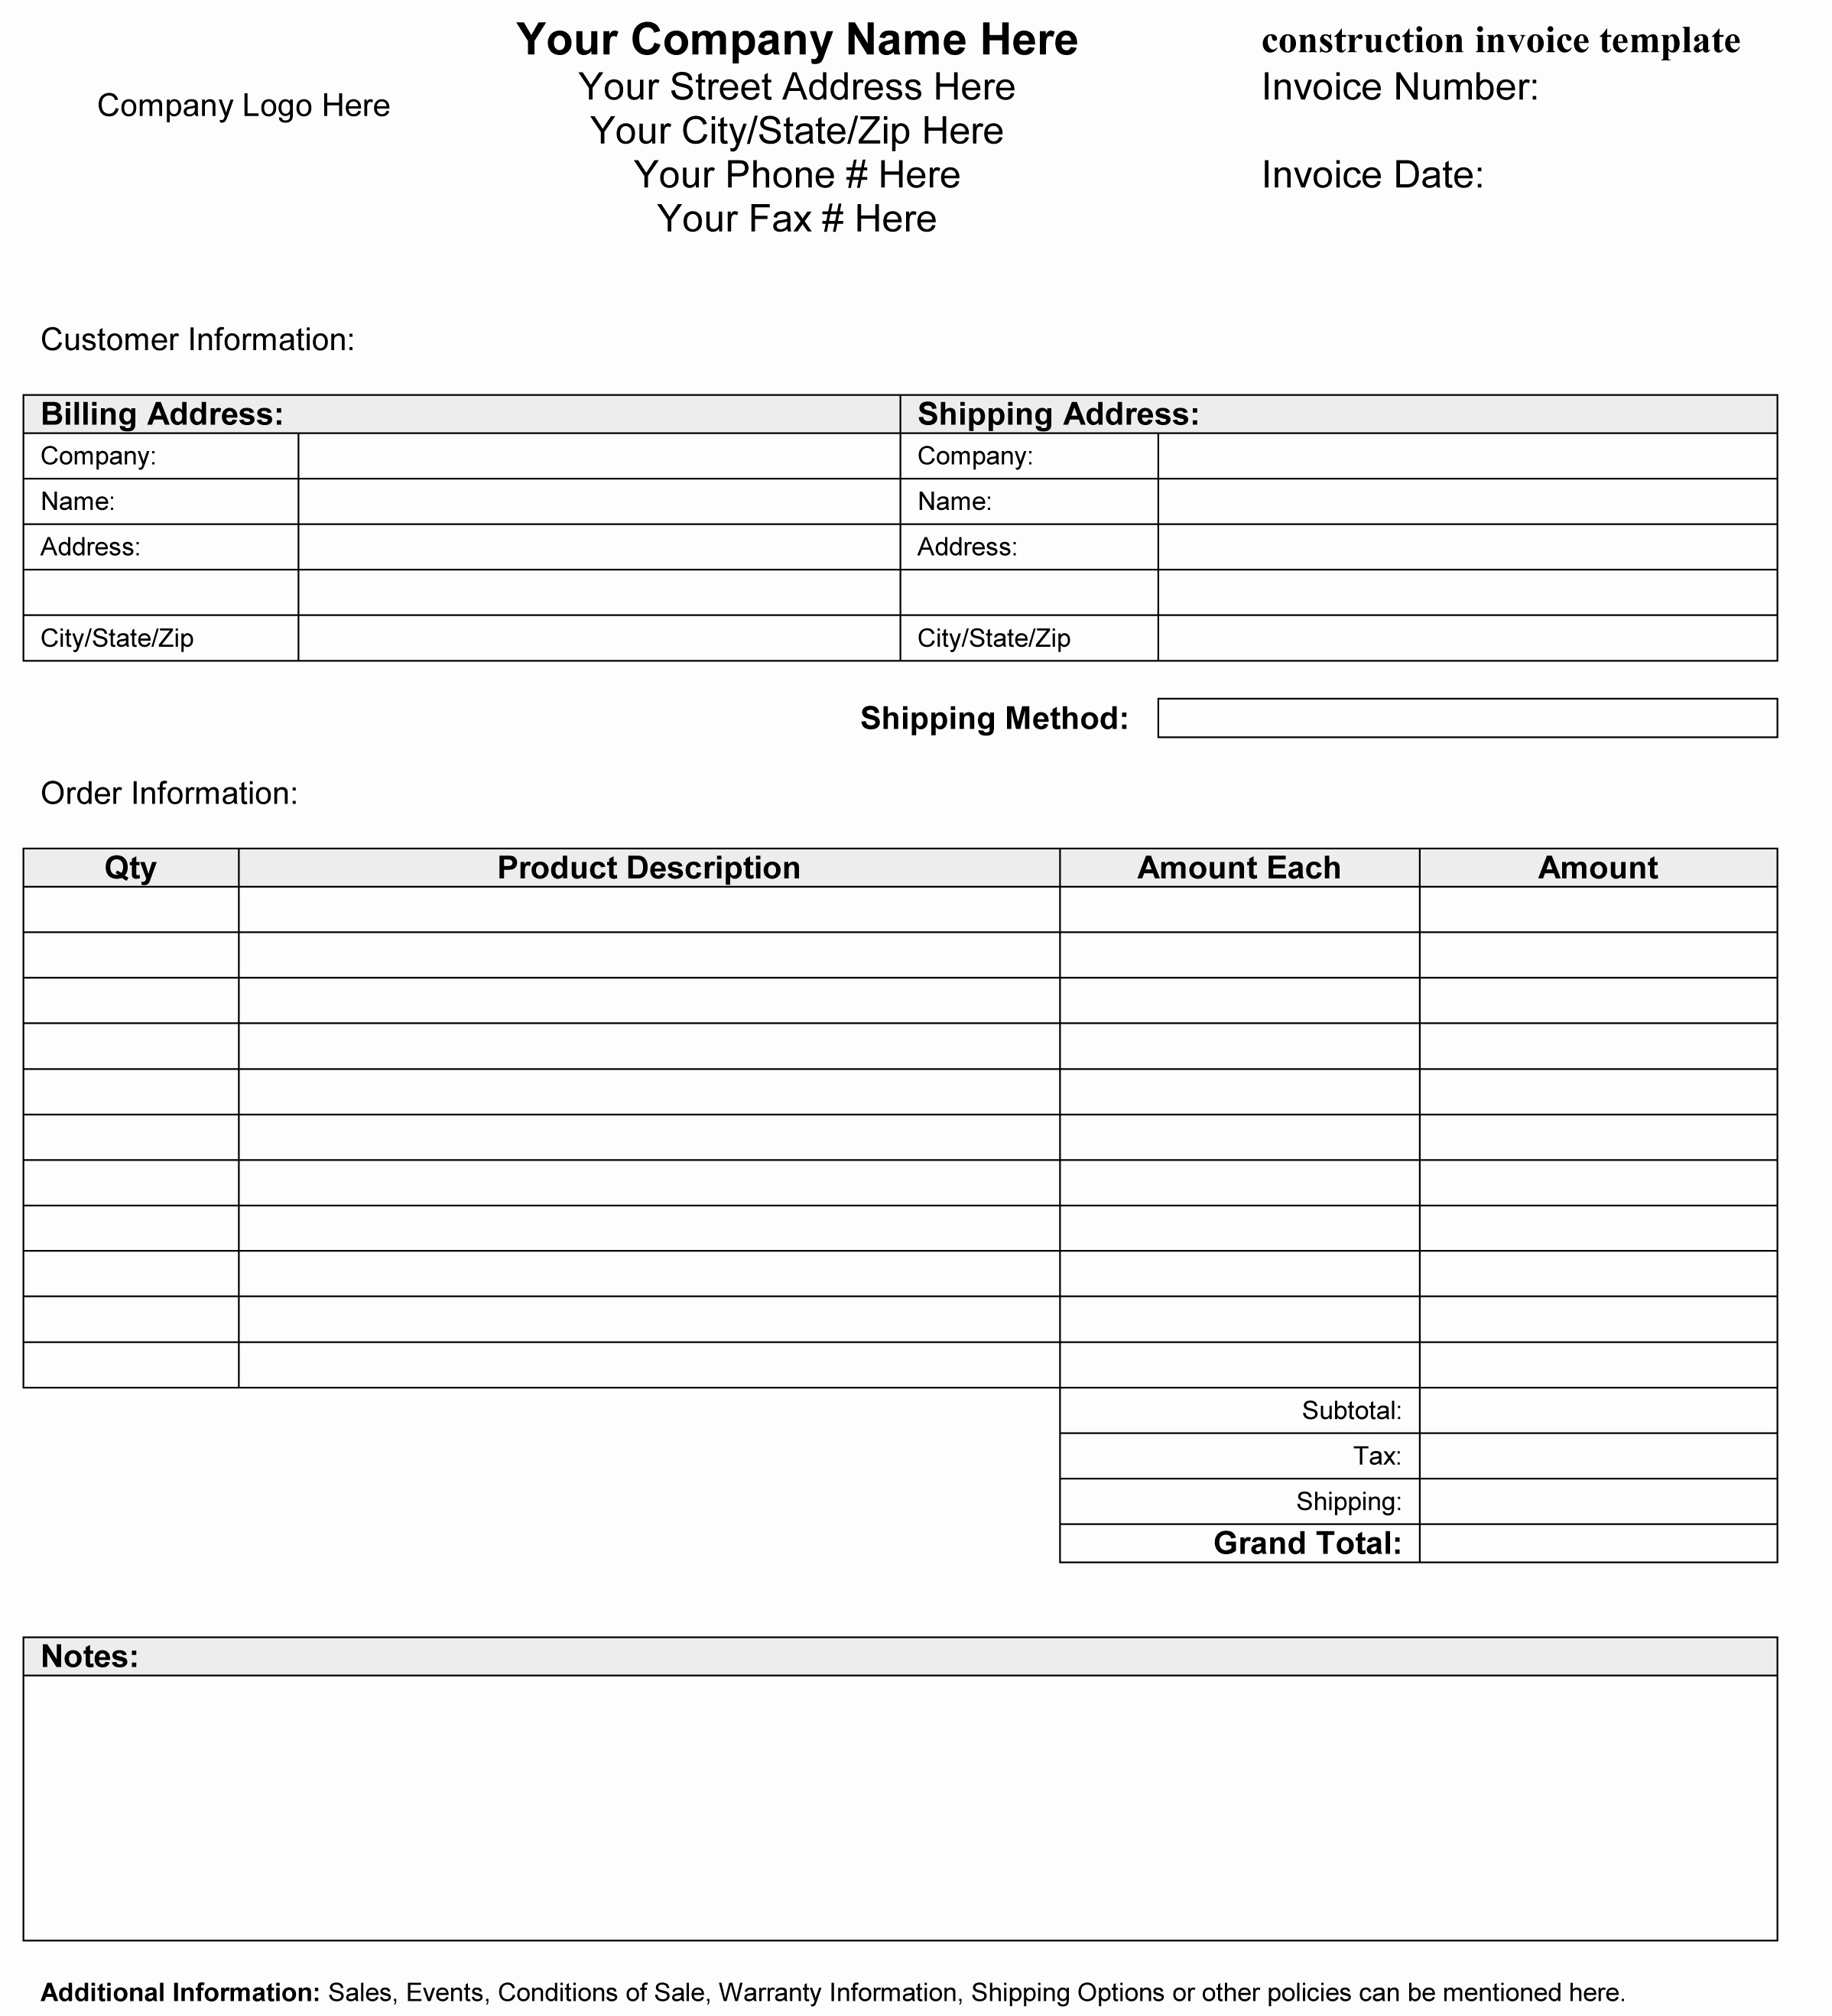 Contractor Invoice Template Word Lovely Construction Invoice Template